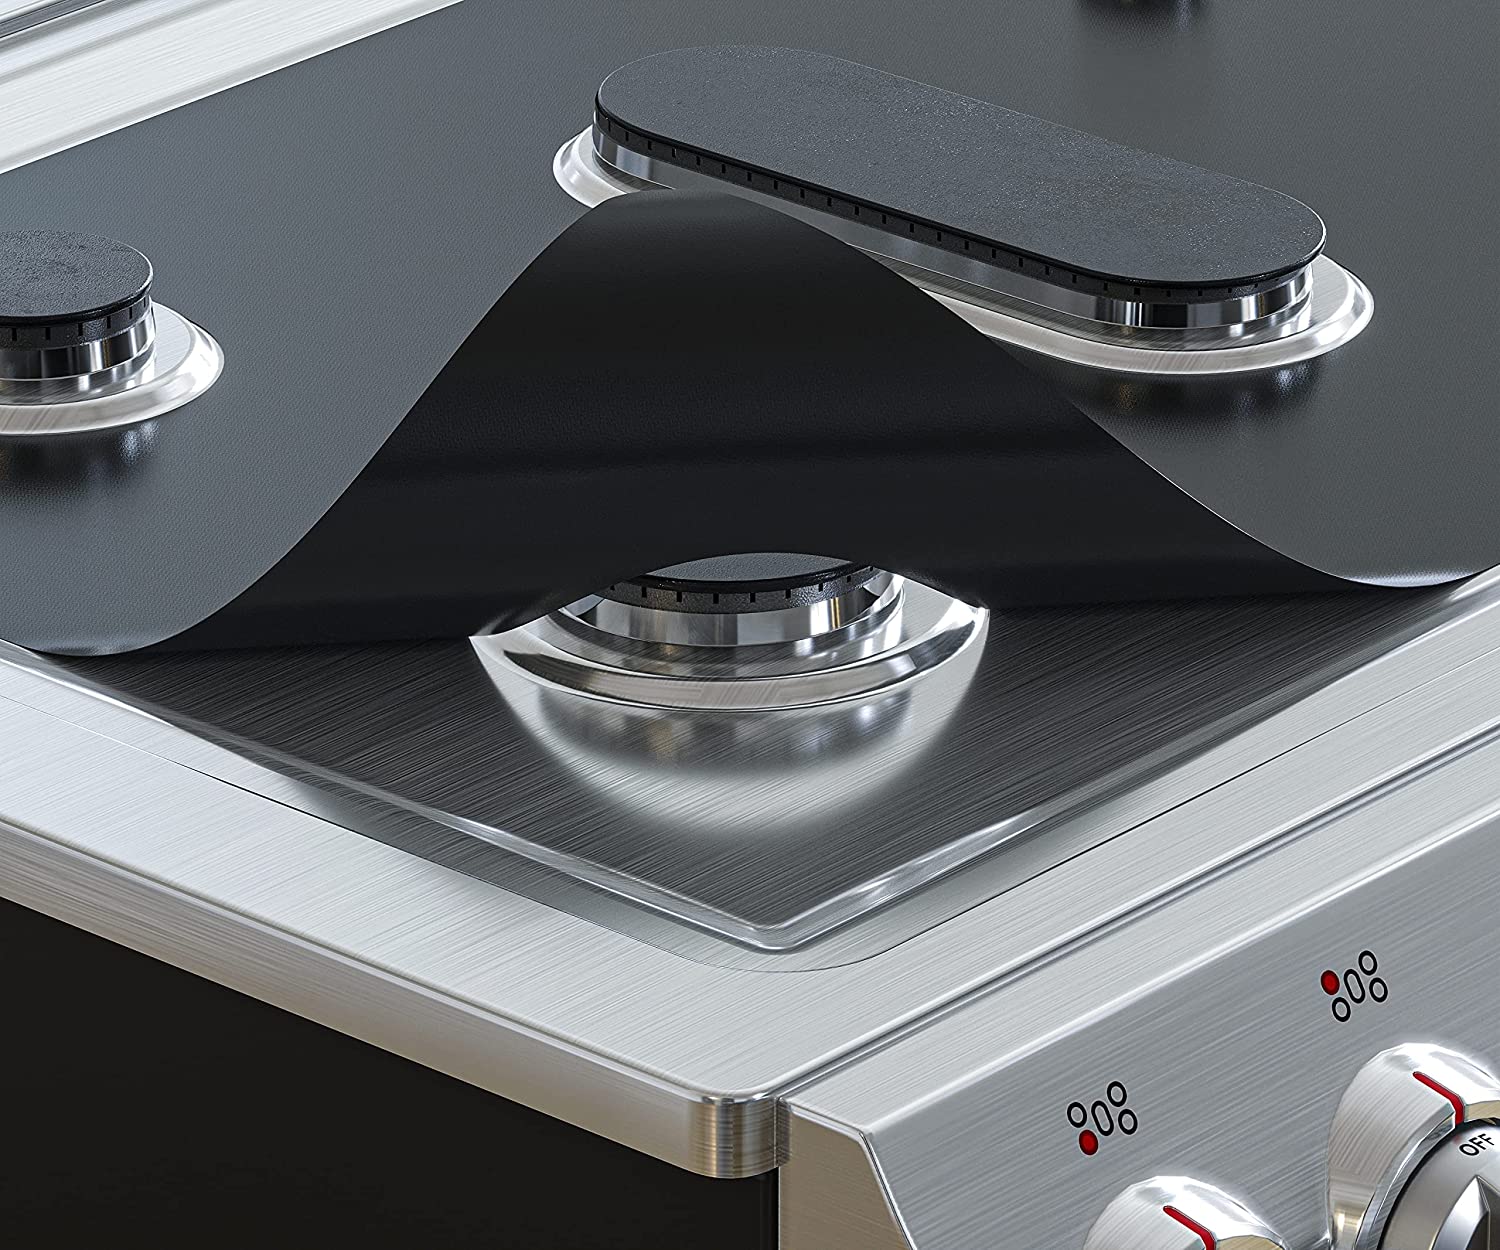 Skywin Stovetop Covers Spill, Protects GAS Range for Samsung GAS Ranges